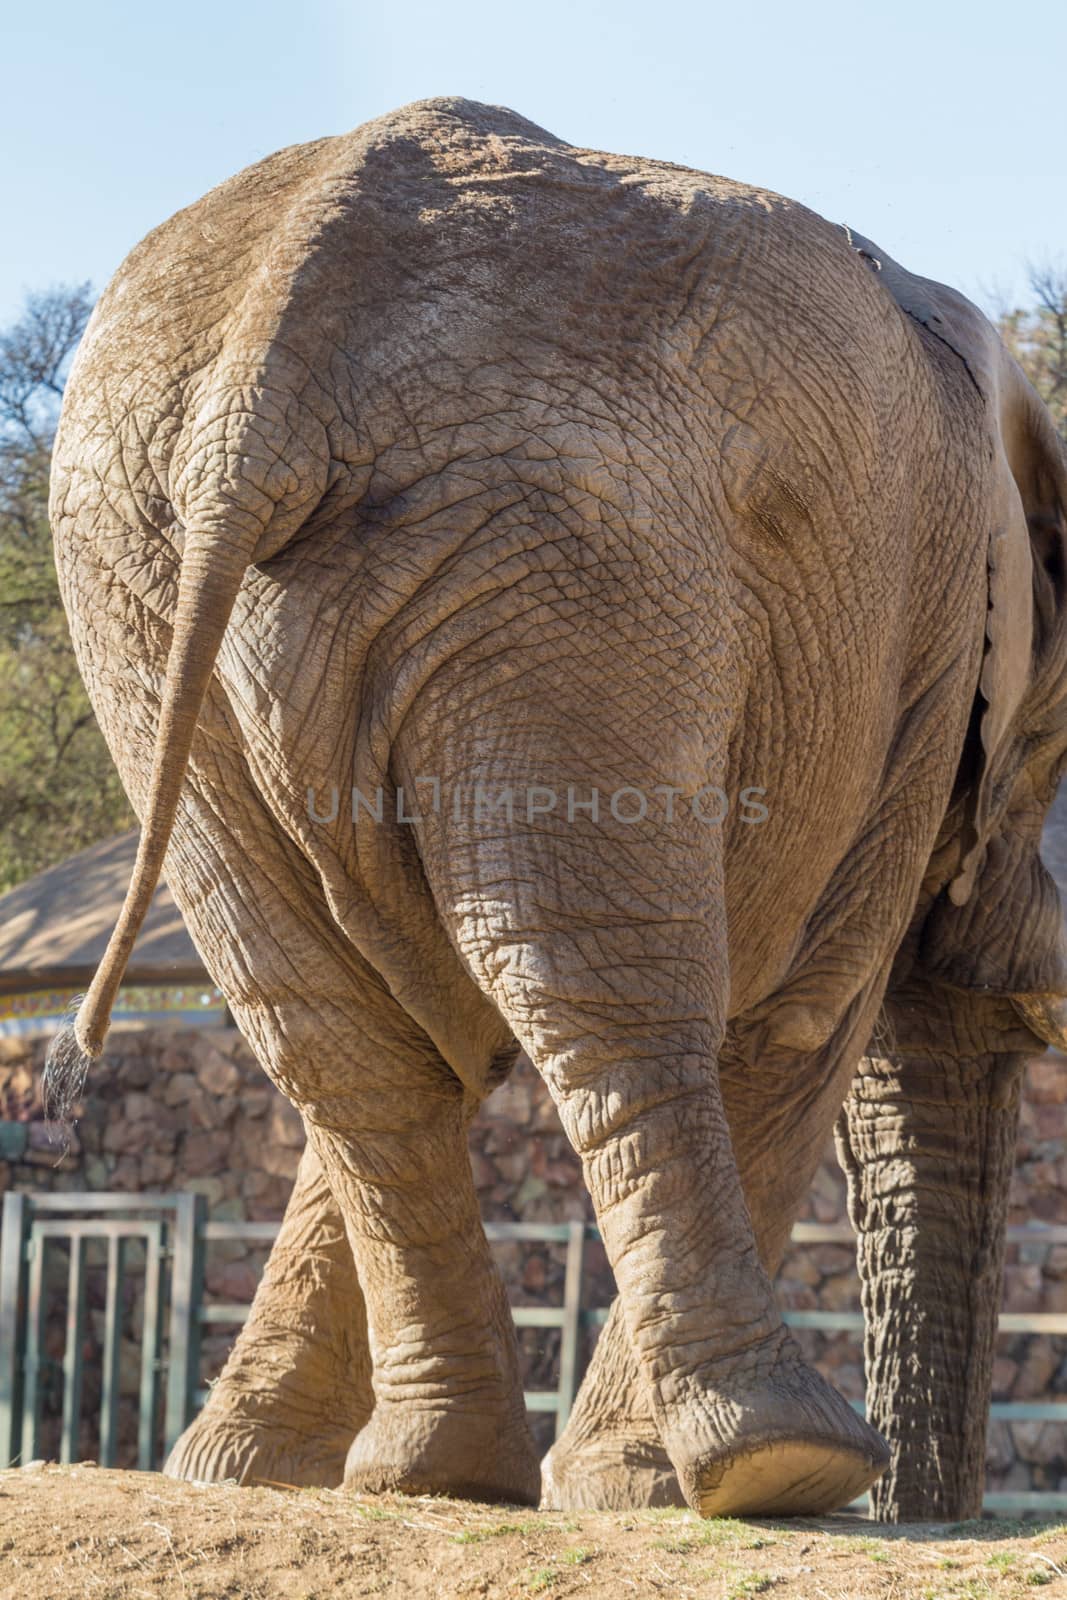 The view of the back of a big male elephant with its hind legs doing the twist